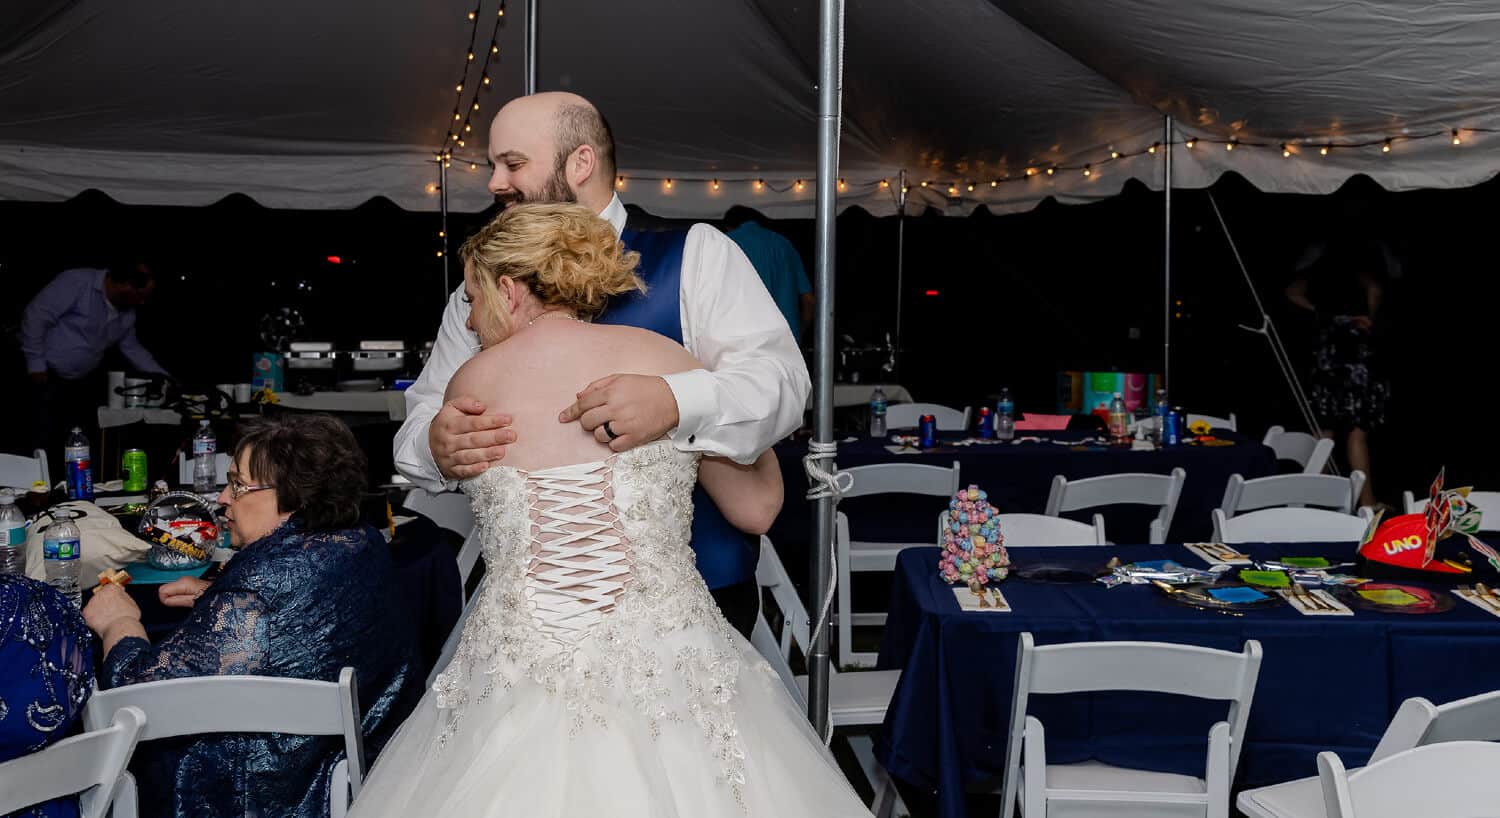 View of bride and grooms hugging while visiting with guests underneath reception tent with tables with blue cloths and white chairs and hanging lights.